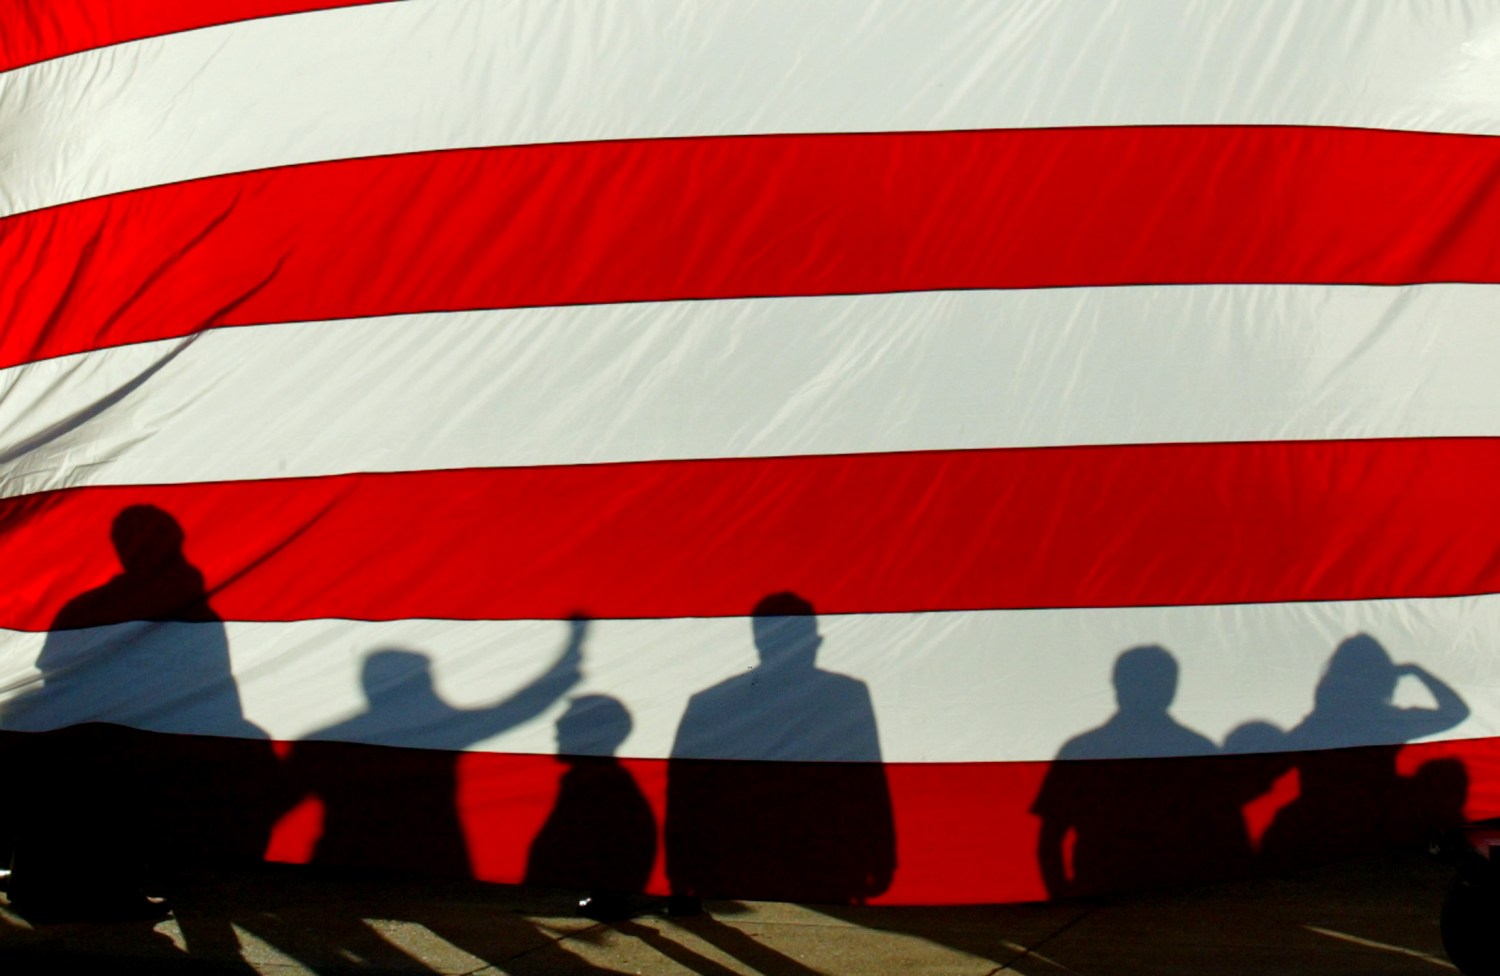 The stripes on the American flag overlaid with shadows cast by campaigners onstage.